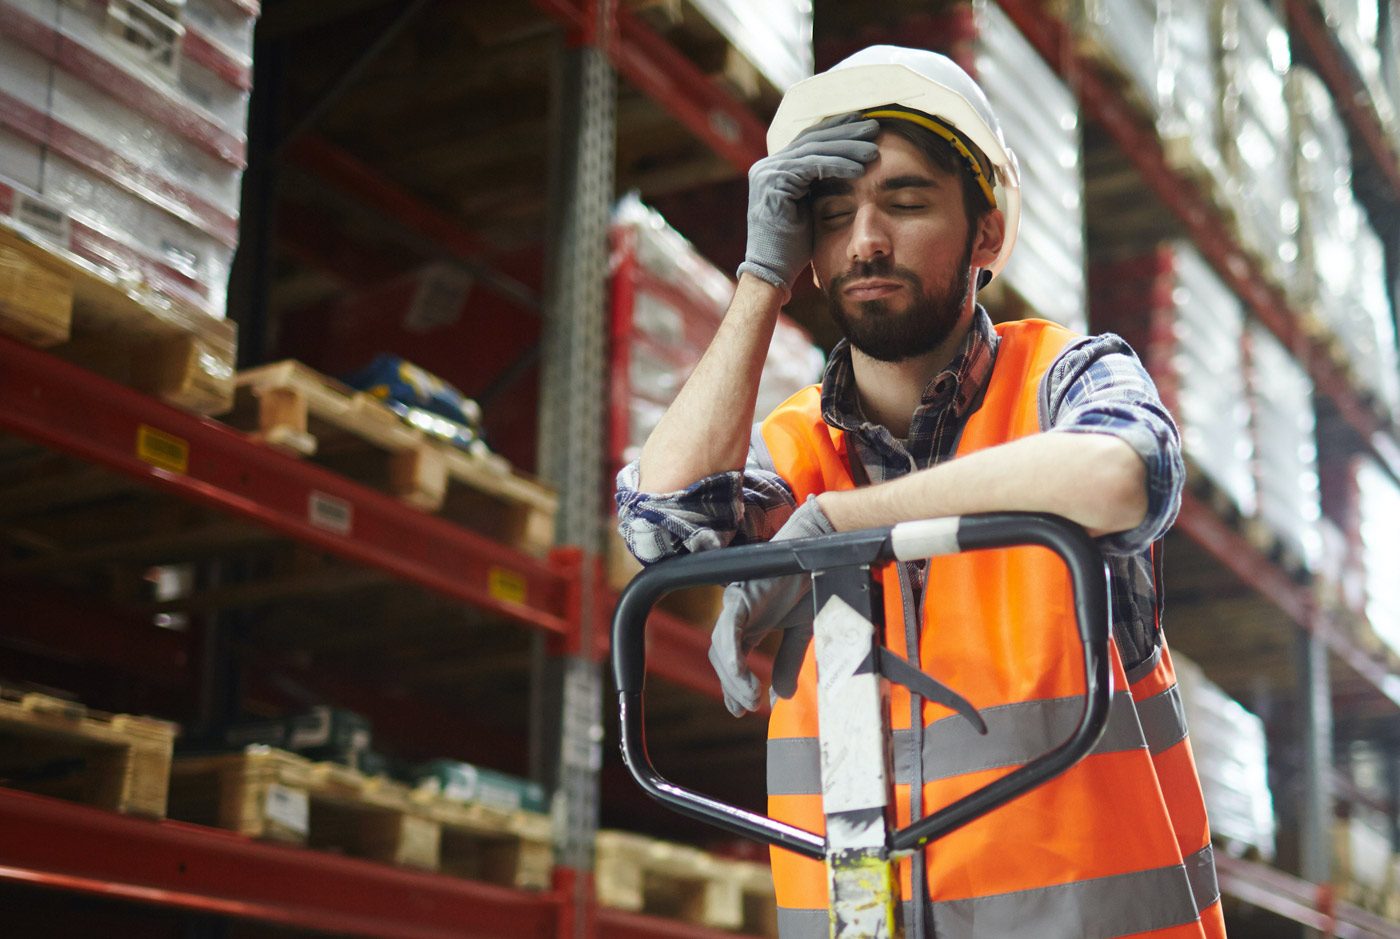 Man wearing a hard hat, safety vest and gloves while falling asleep in a warehouse